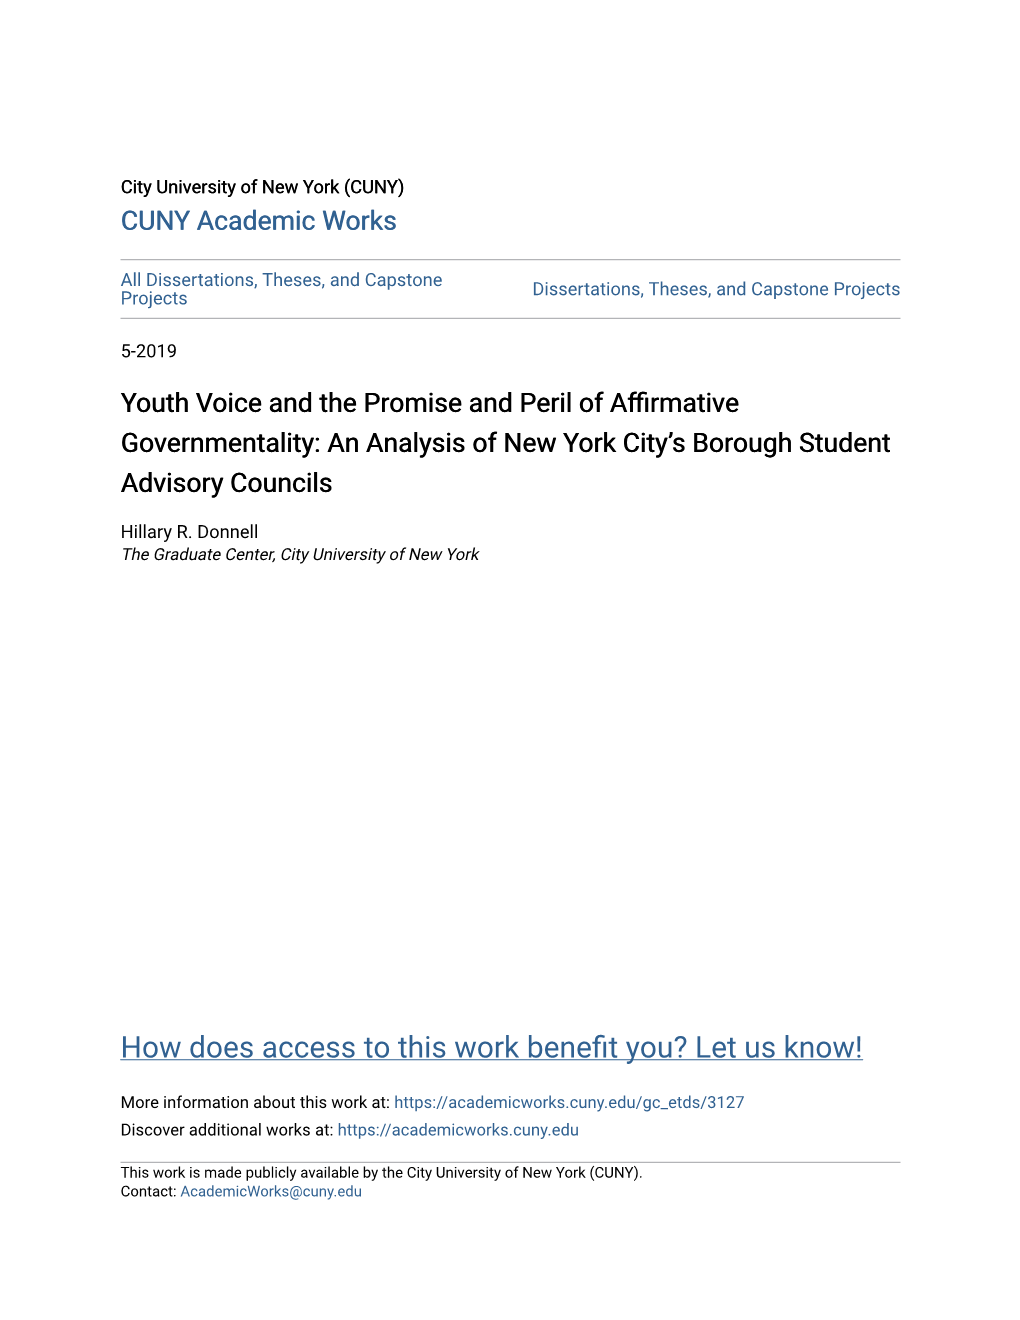 Youth Voice and the Promise and Peril of Affirmative Governmentality: an Analysis of New York City’S Borough Student Advisory Councils